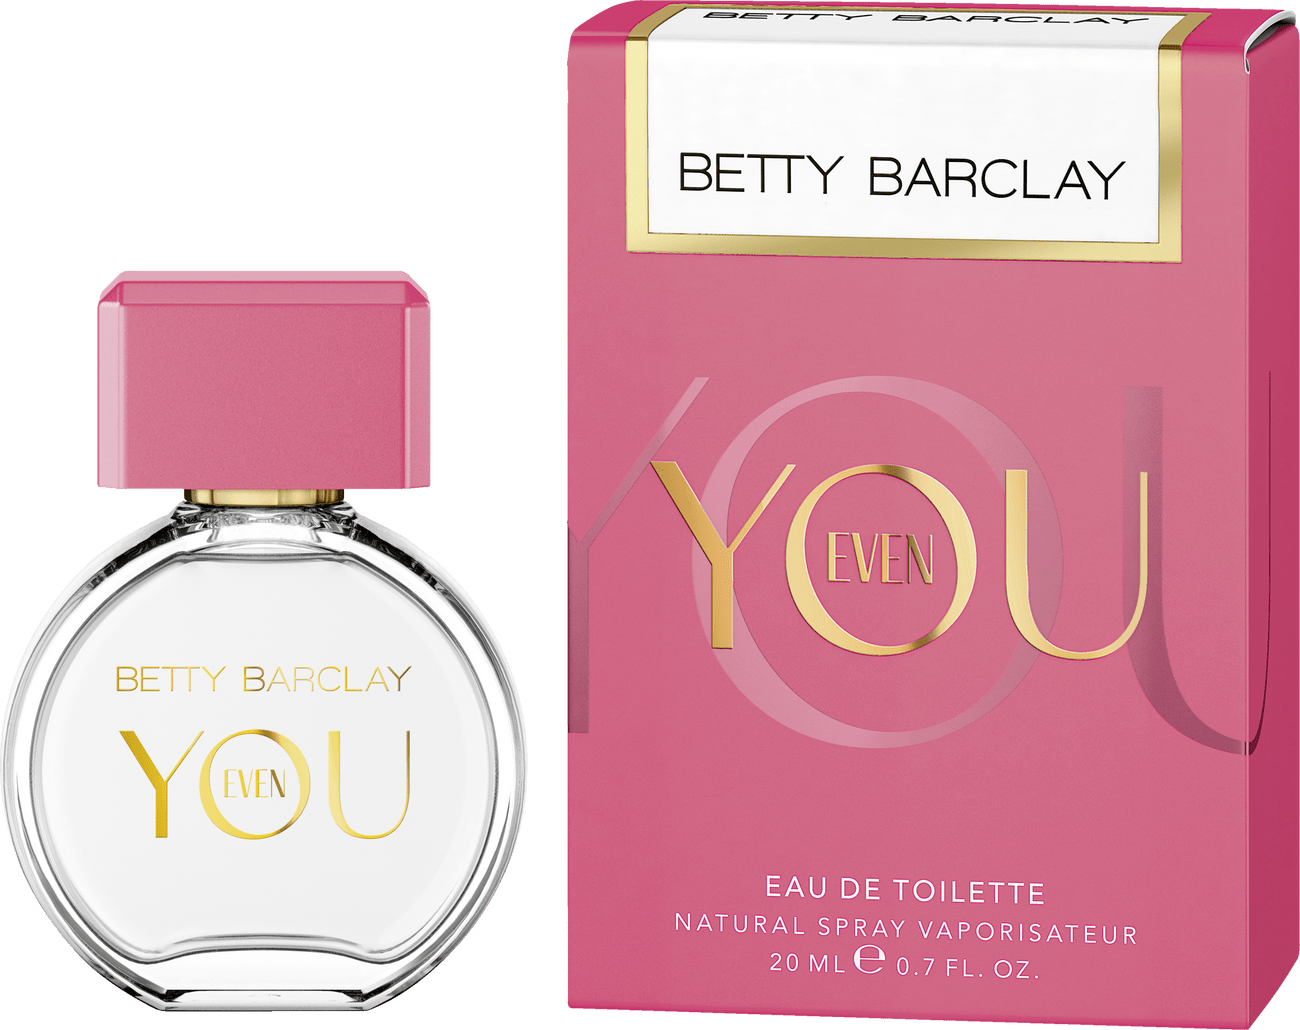 Betty Barclay | Even You | EdT 20 ml